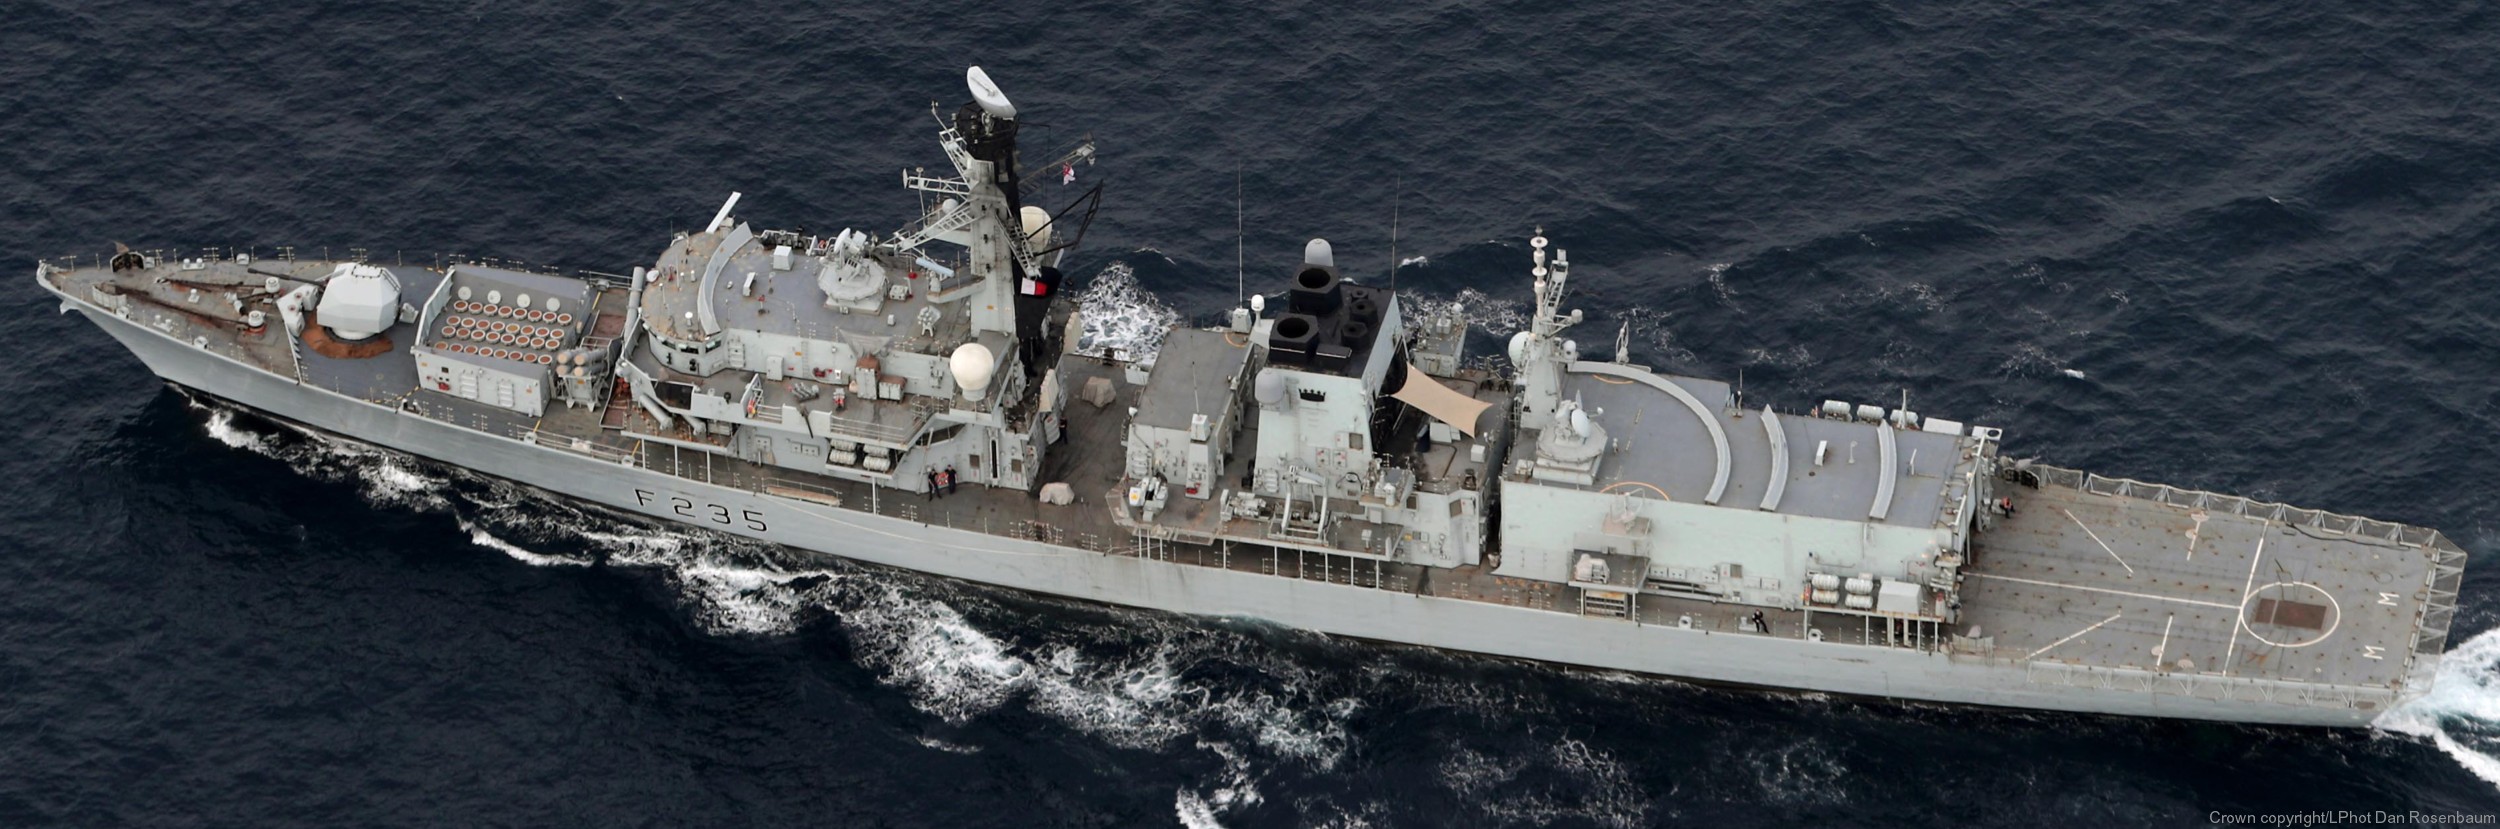 f-235 hms monmouth type 23 duke class guided missile frigate ffg royal navy 36